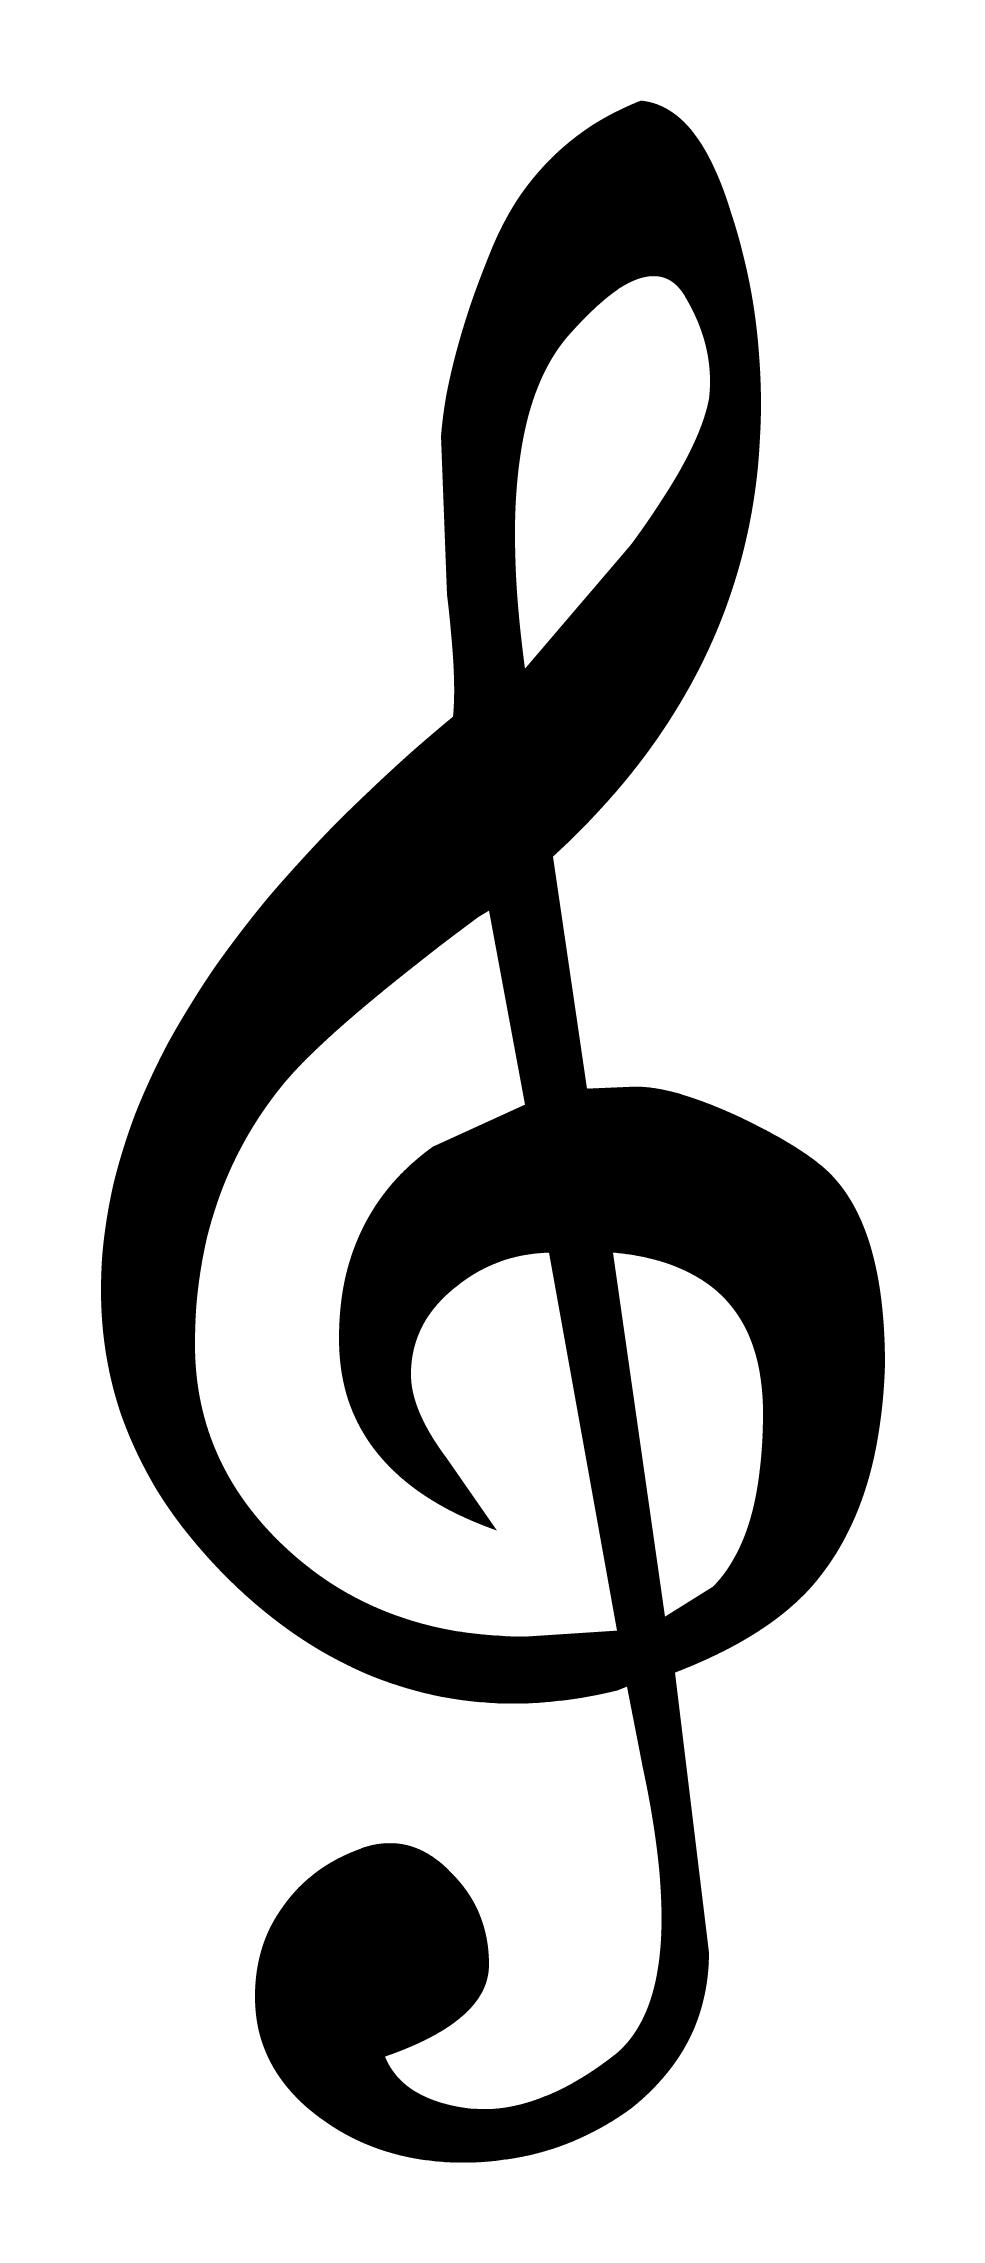 Image - Treble Clef Pin.PNG | Club Penguin Wiki | FANDOM powered by ...